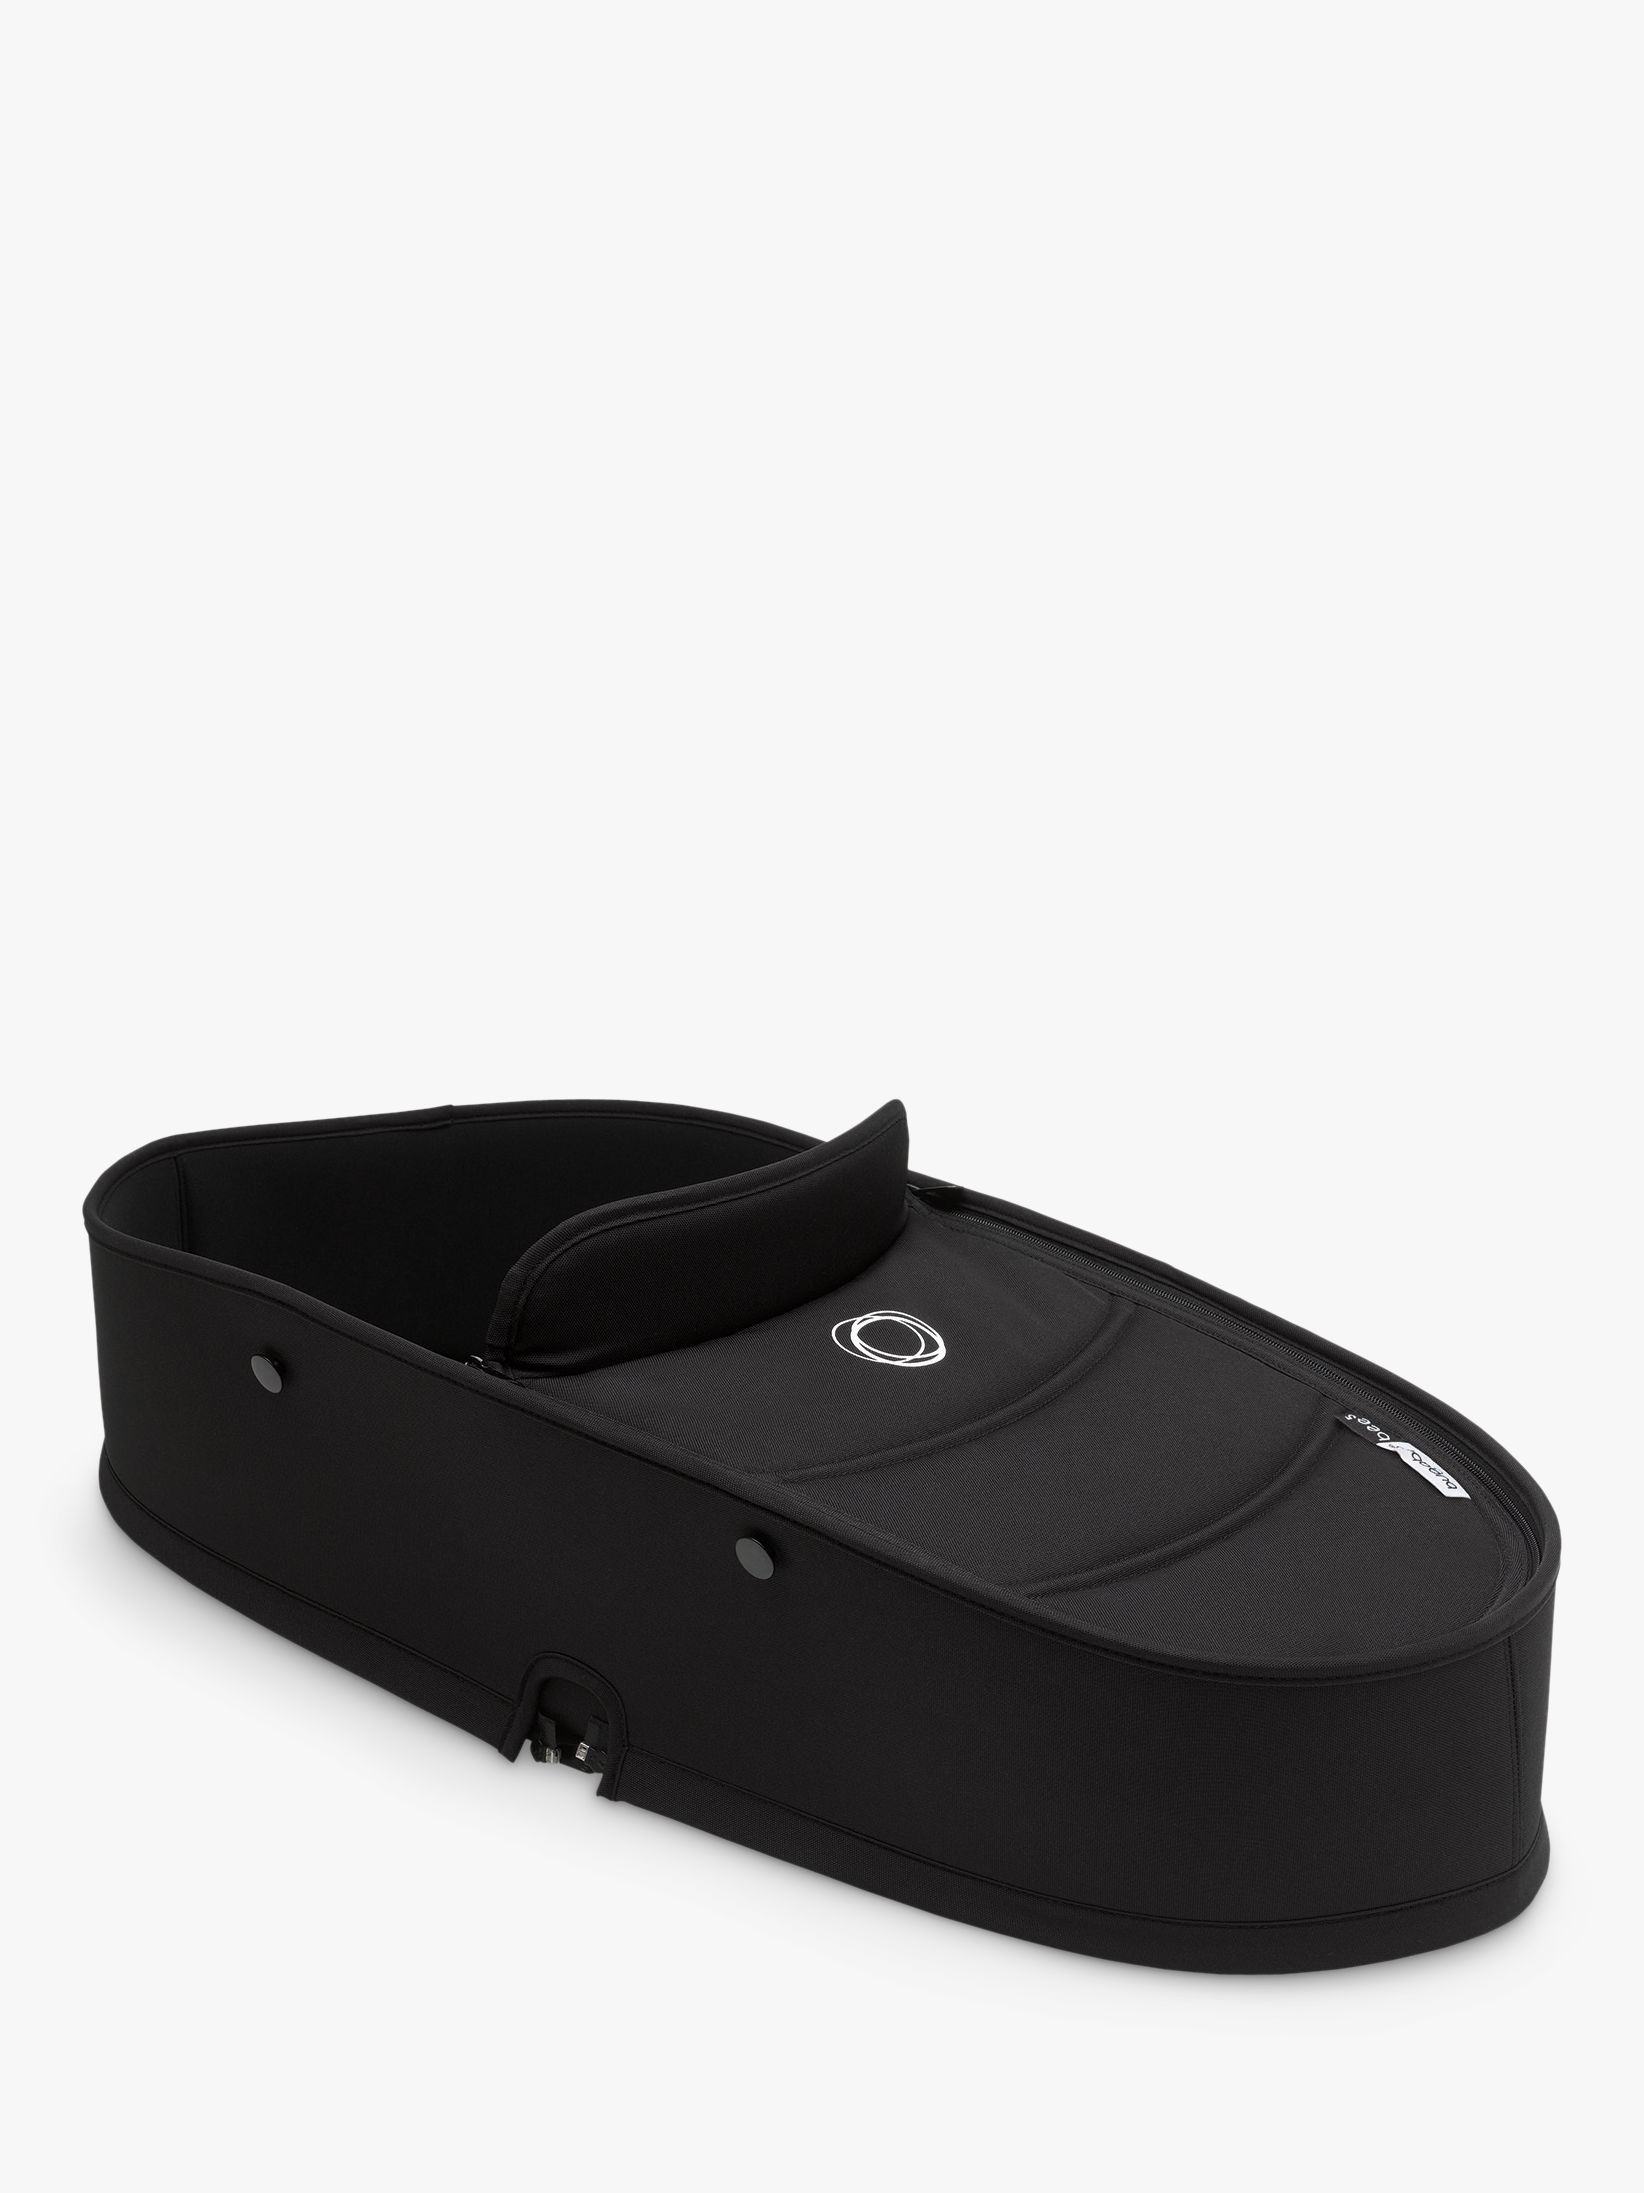 Image of Bugaboo Bee5 Carrycot Black